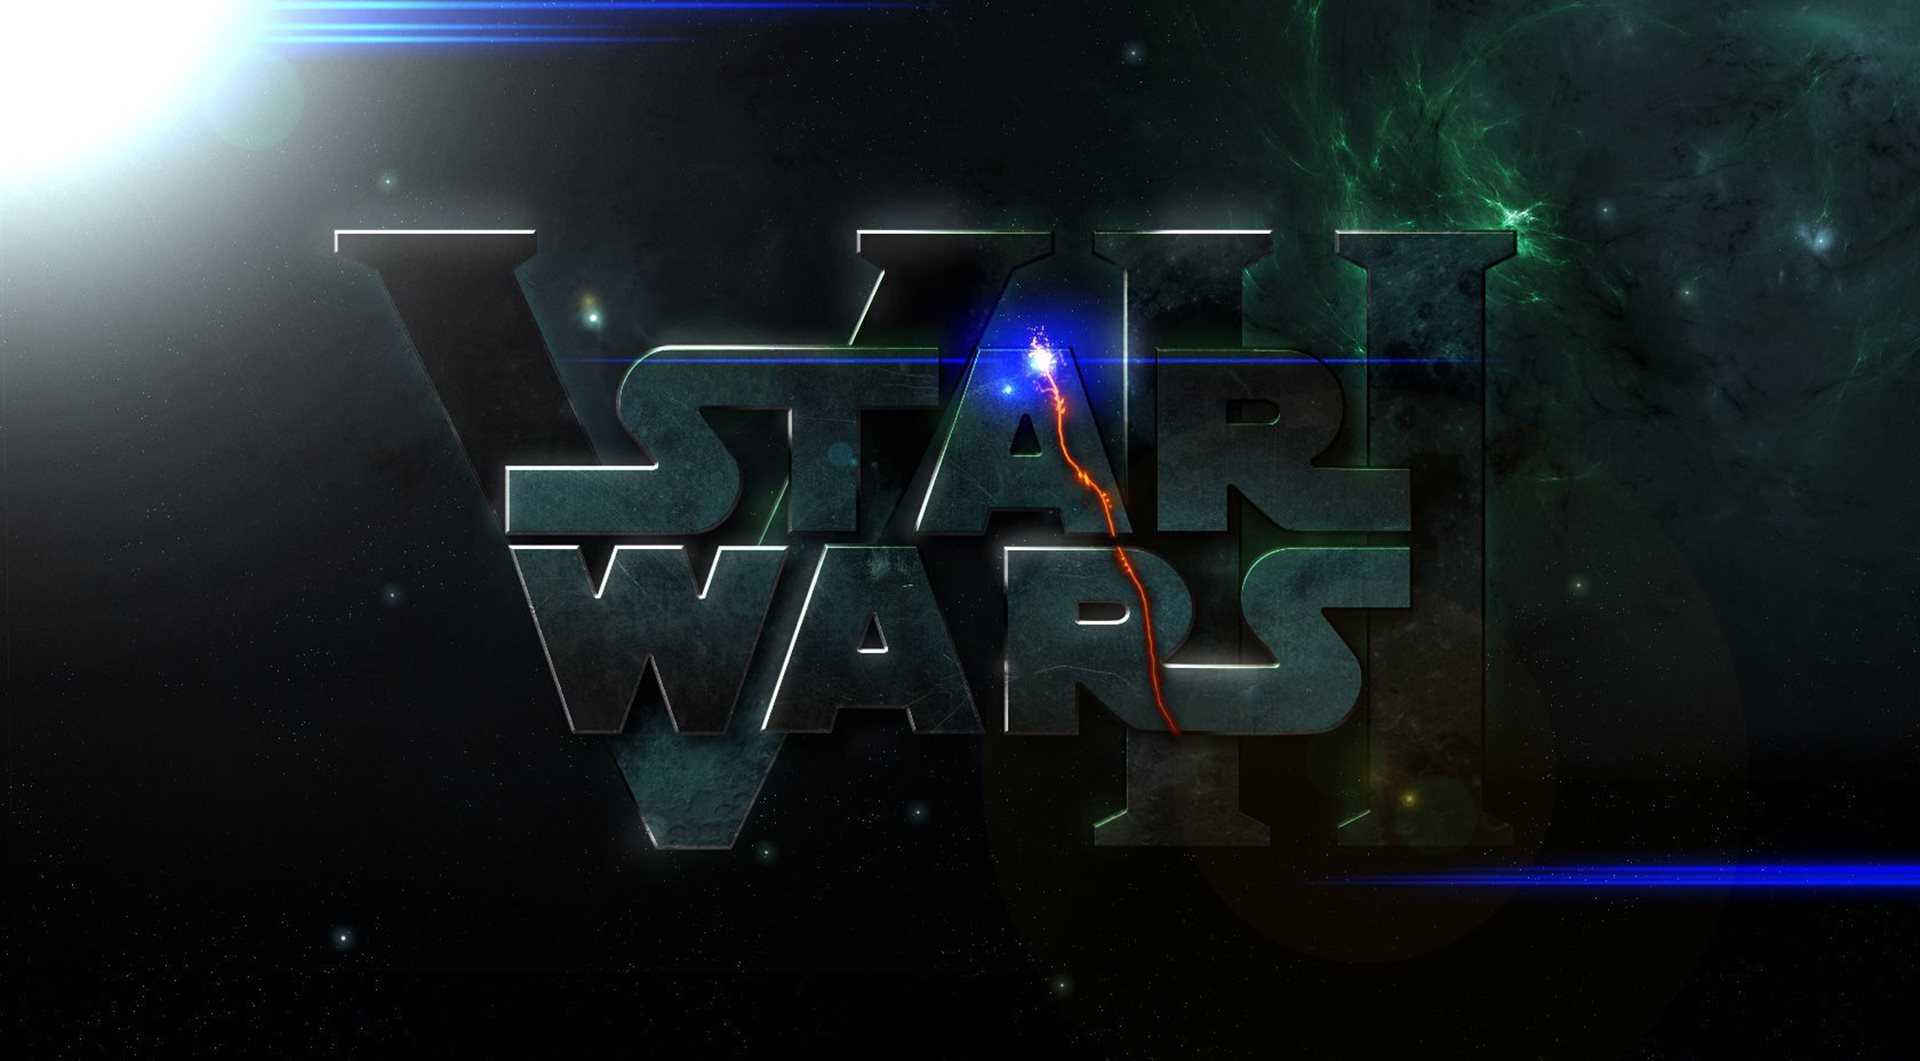  force awakens 2015 film hd wallpaper search more high definition 1080p